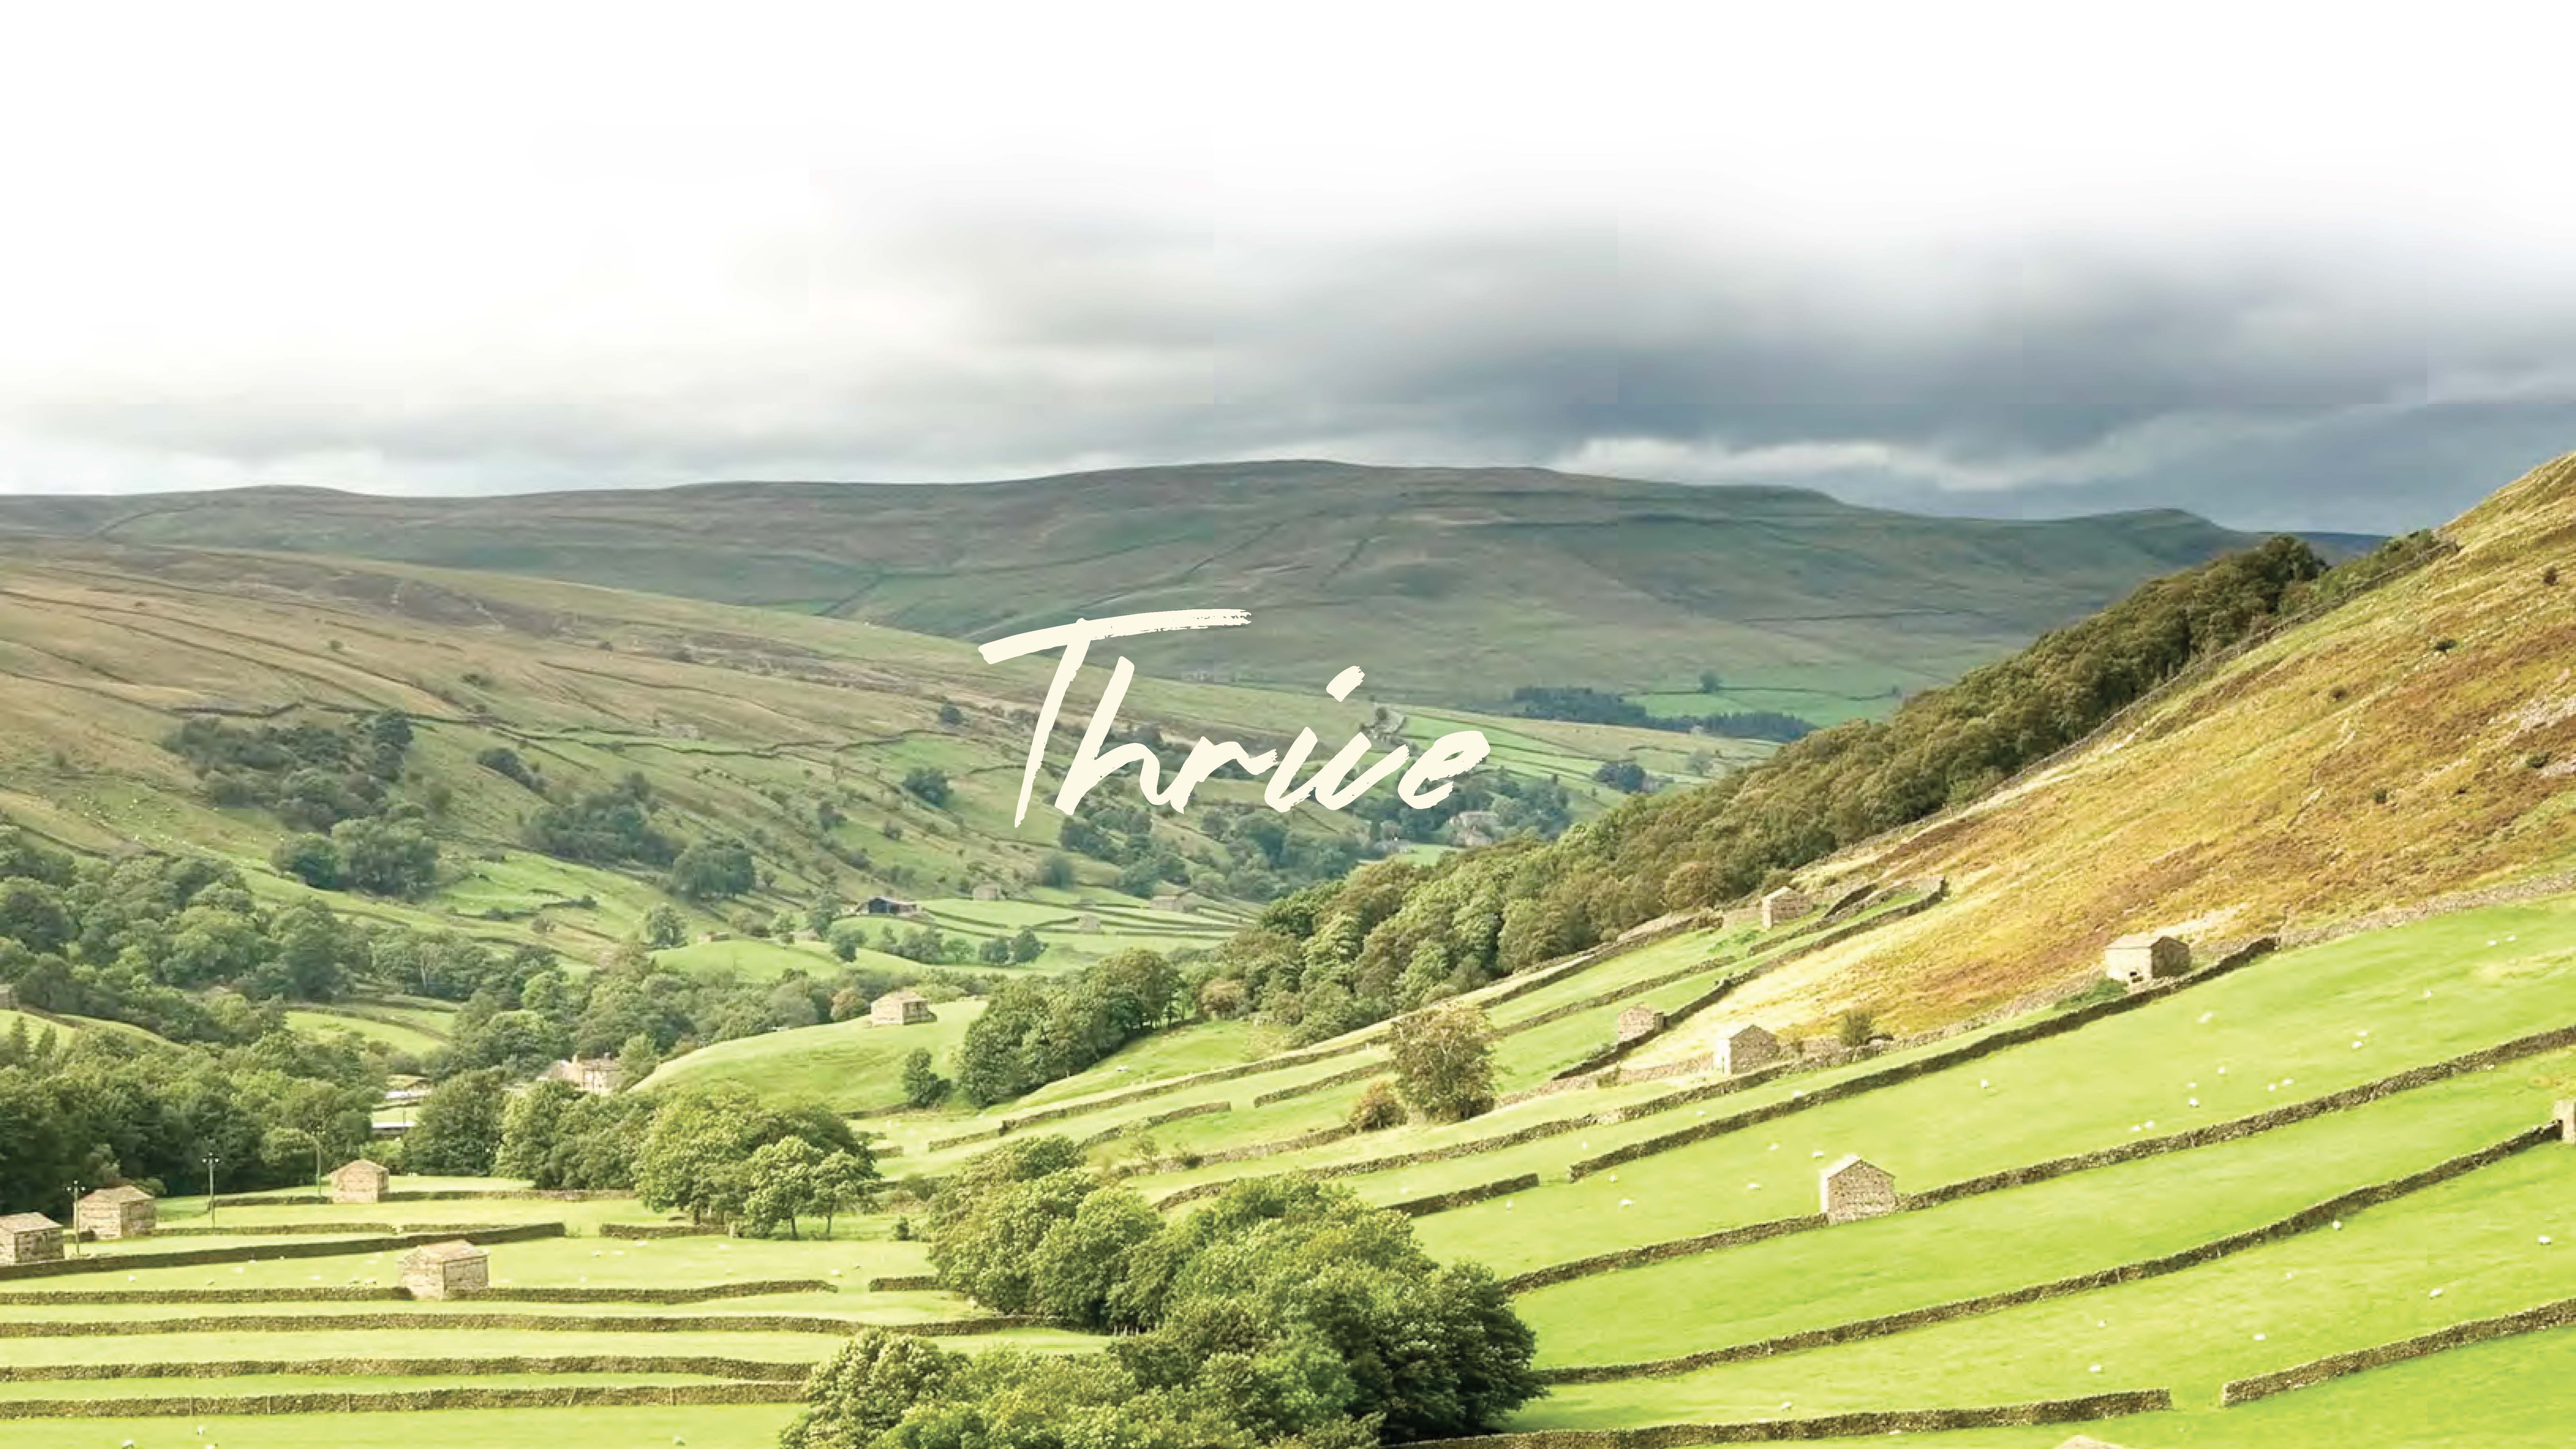 BA Graphic Design work by James Saunders showing a landscape of Ilkley Moor and the Thrive logo.